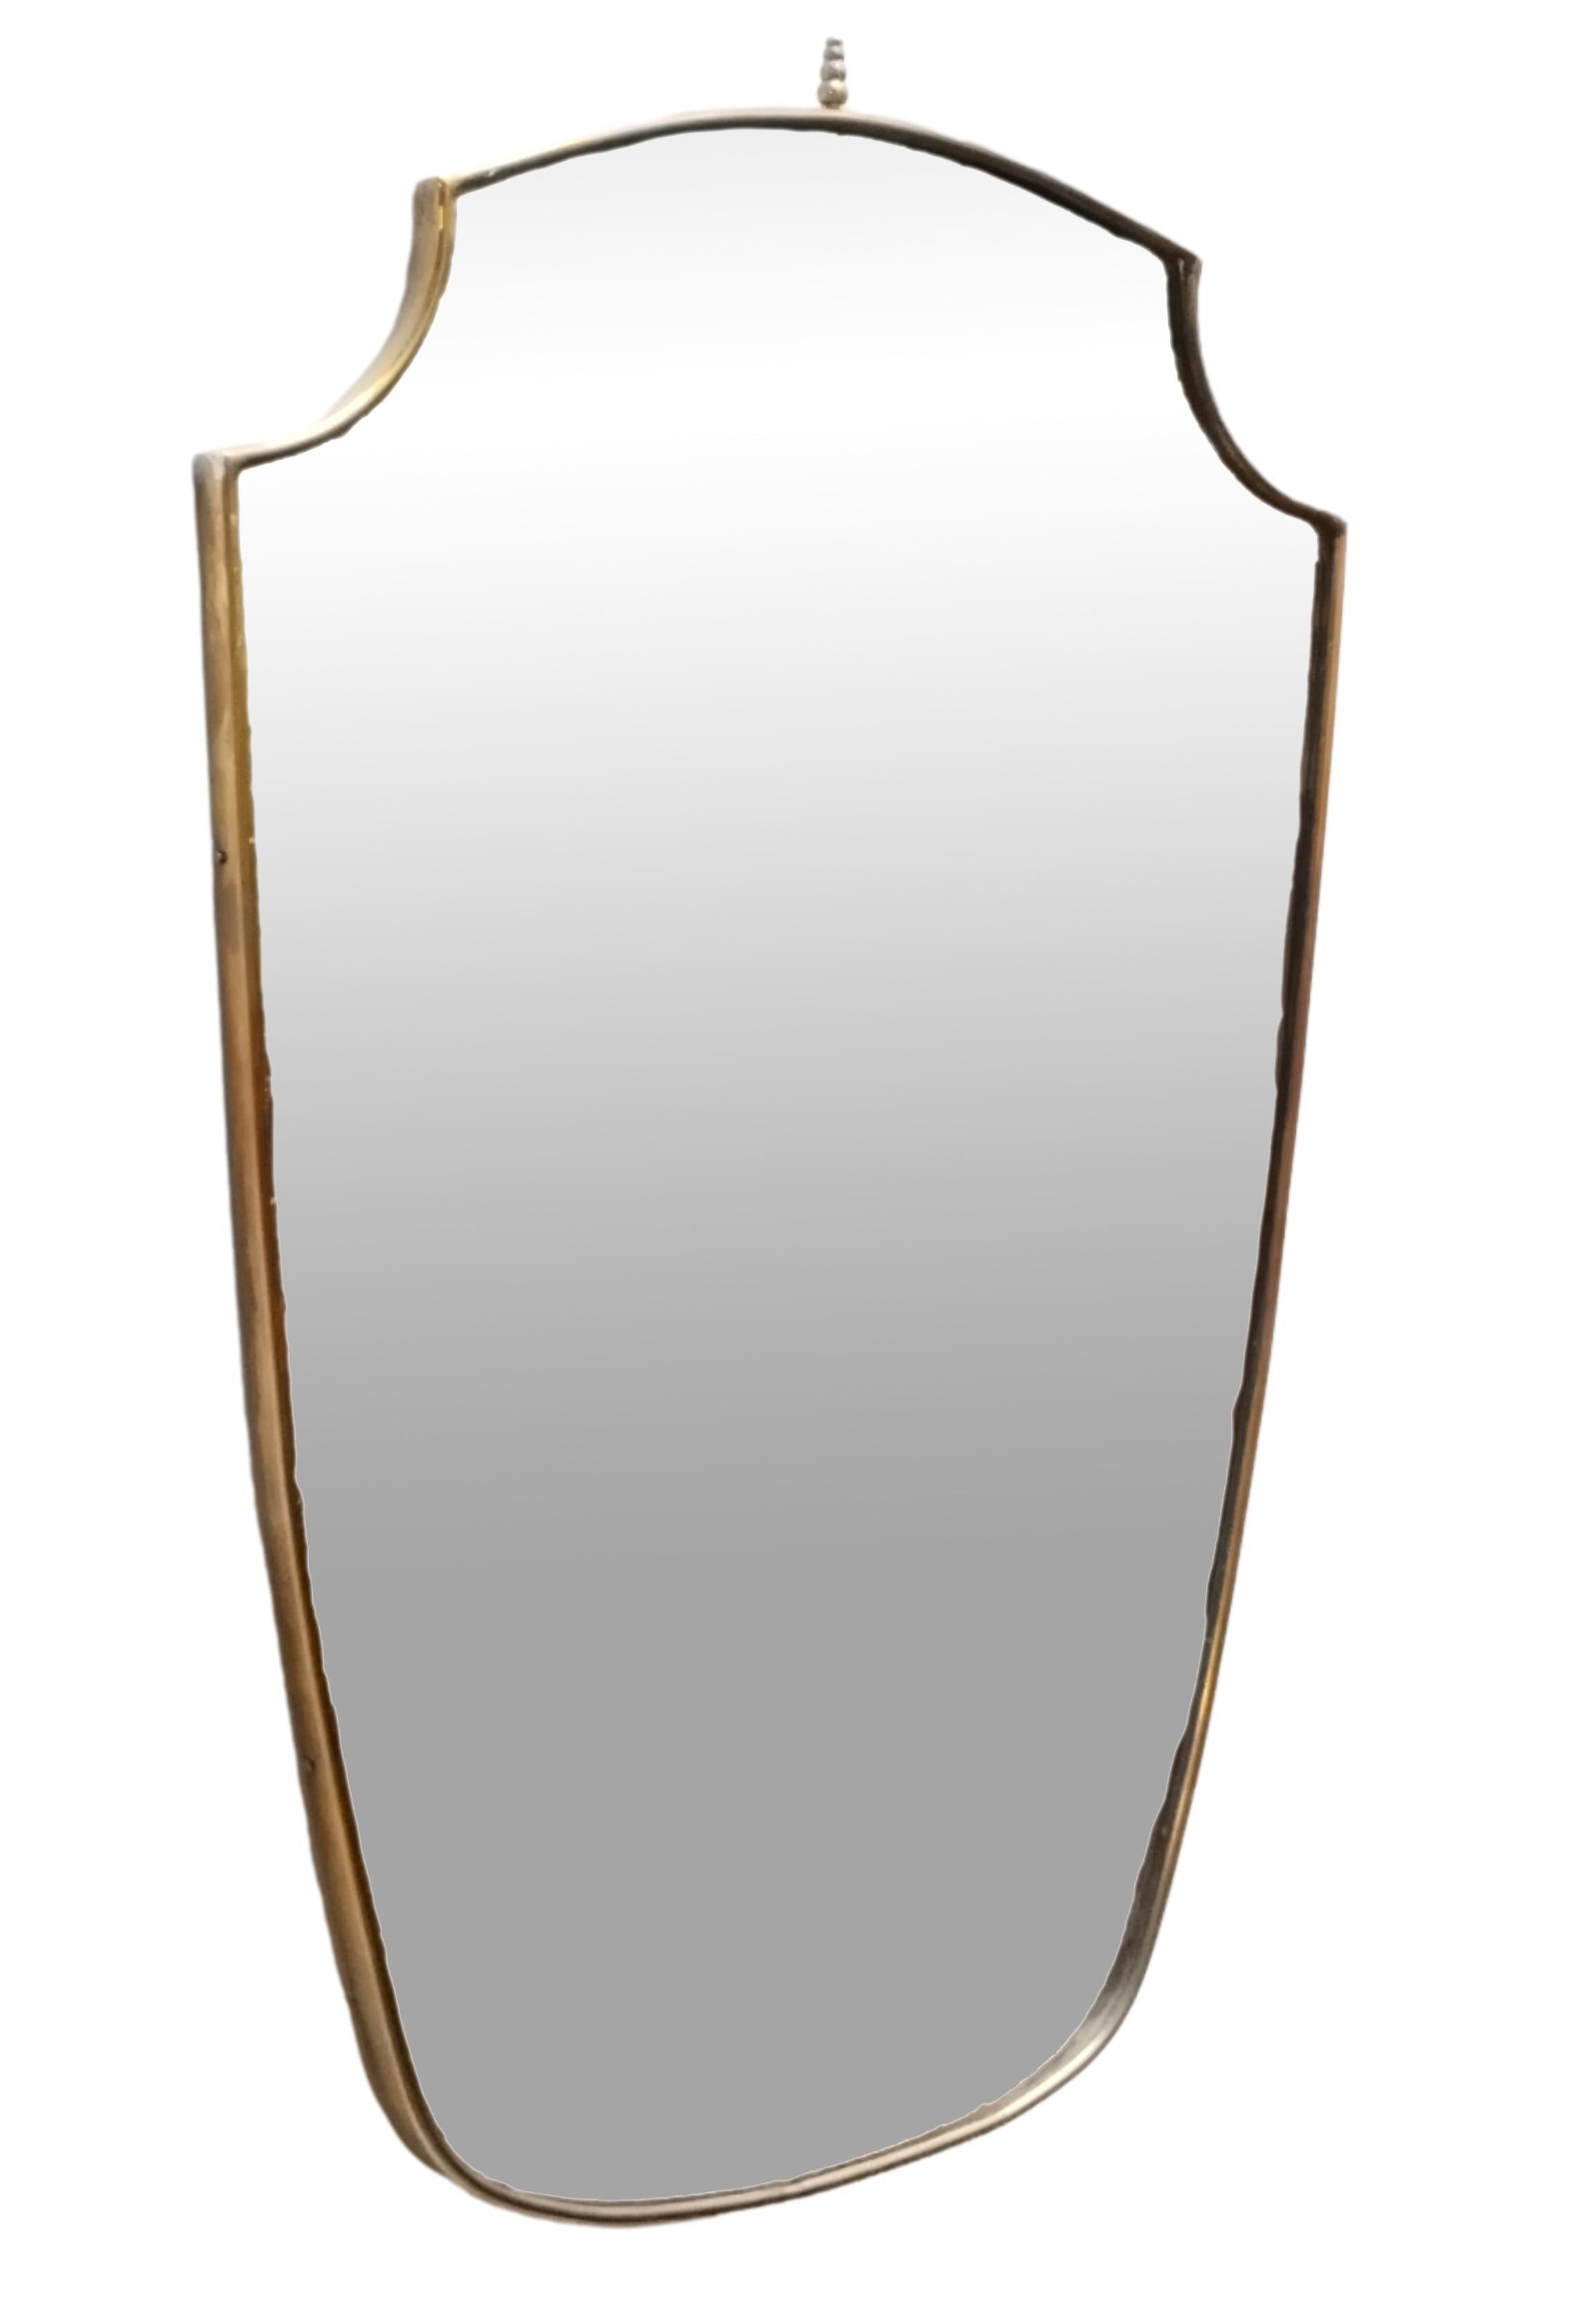 Wall mirror with brass frame, made in the 1960s in the style of Giò Ponti. The frame shows some signs of time.

